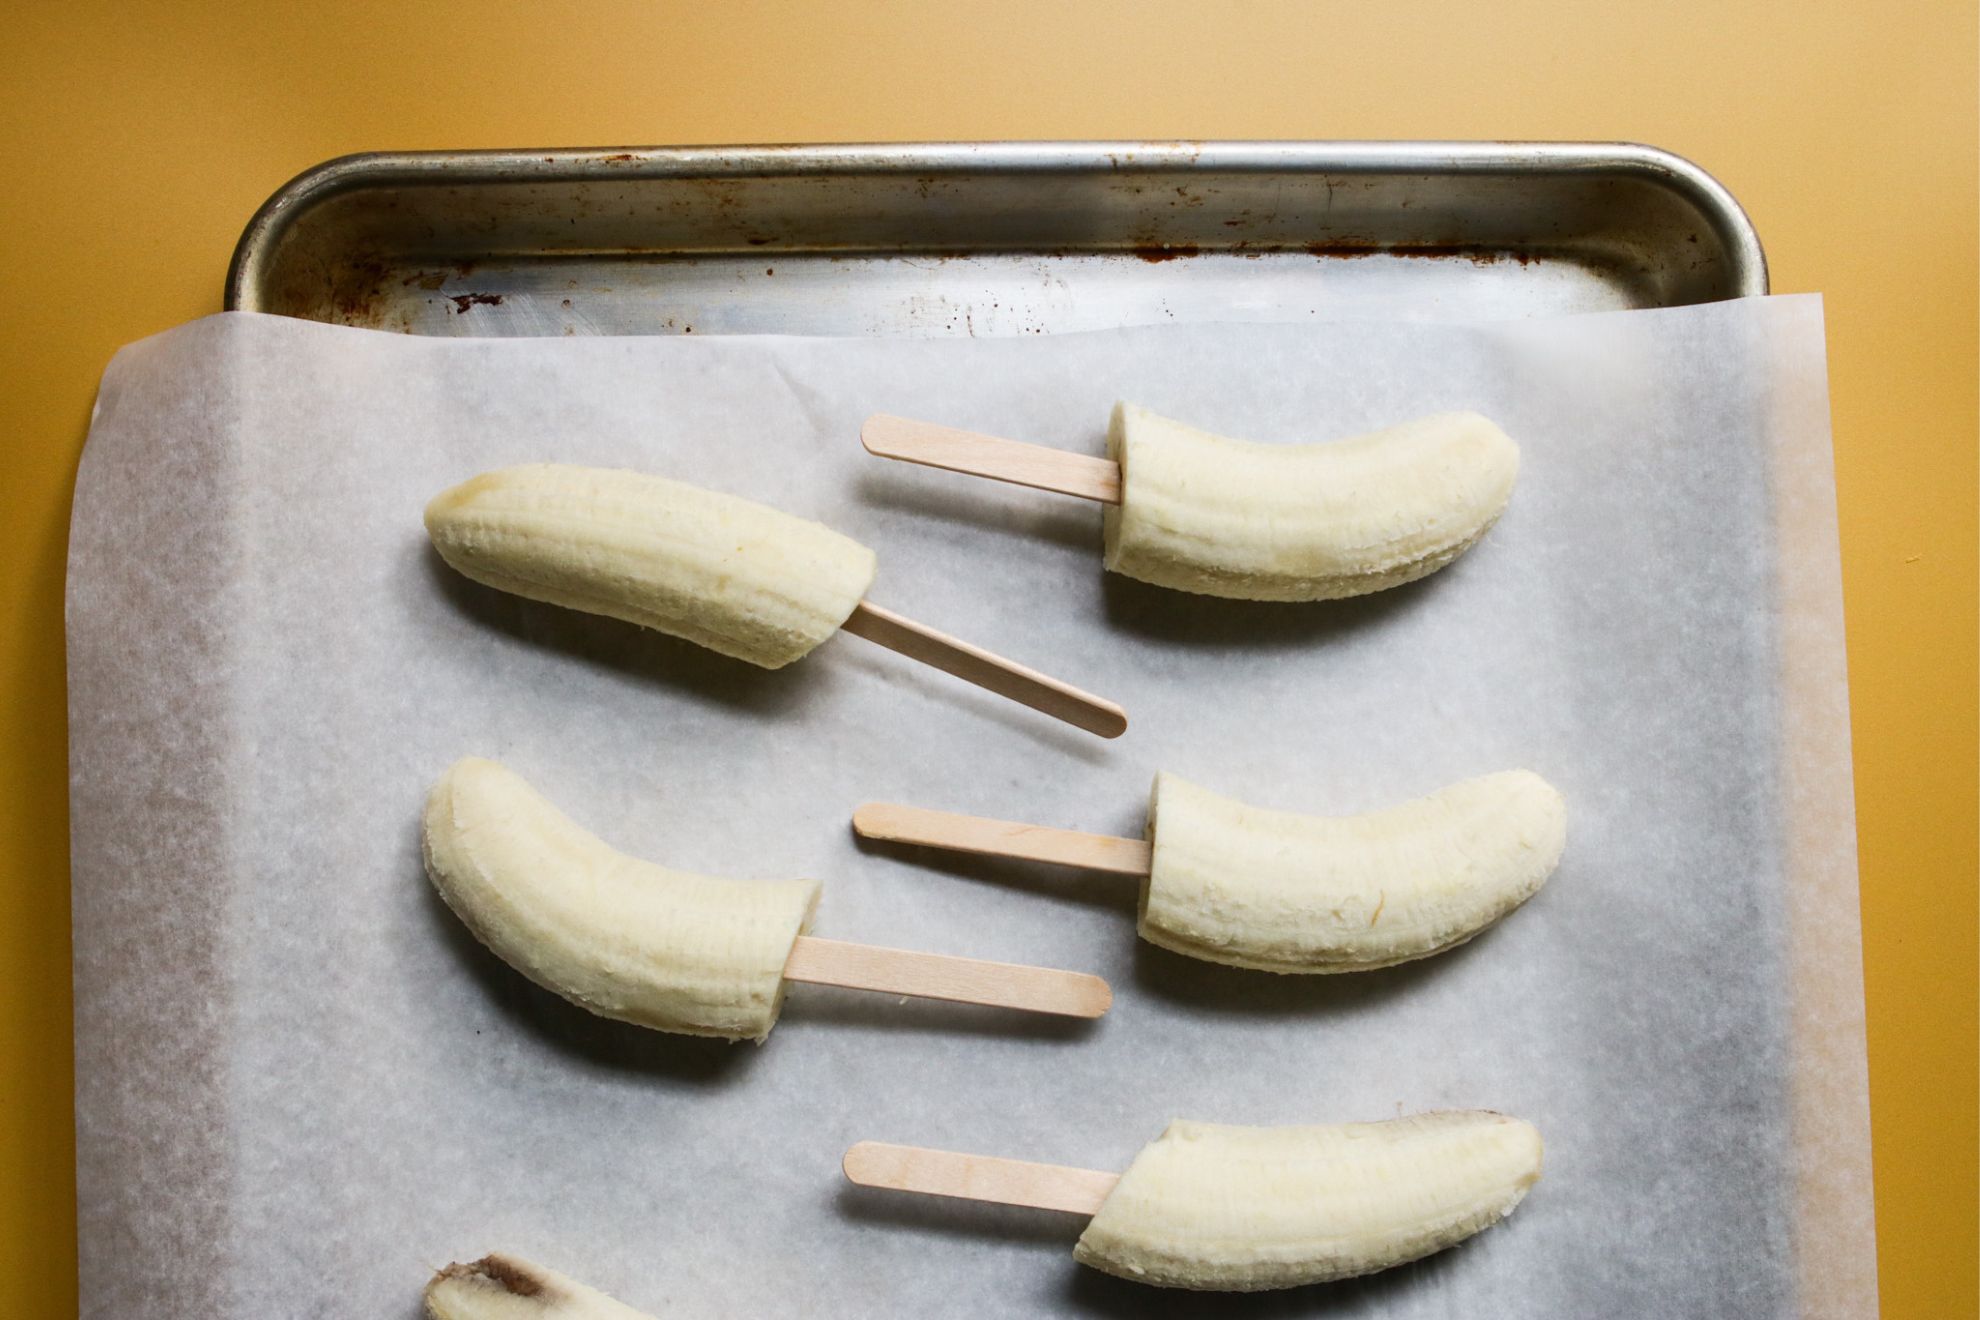 This is an overhead horizontal image of a baking sheet with white parchment paper on a yellow surface. On the parchment paper are banana halves with popsicle sticks inserted into the bottom.